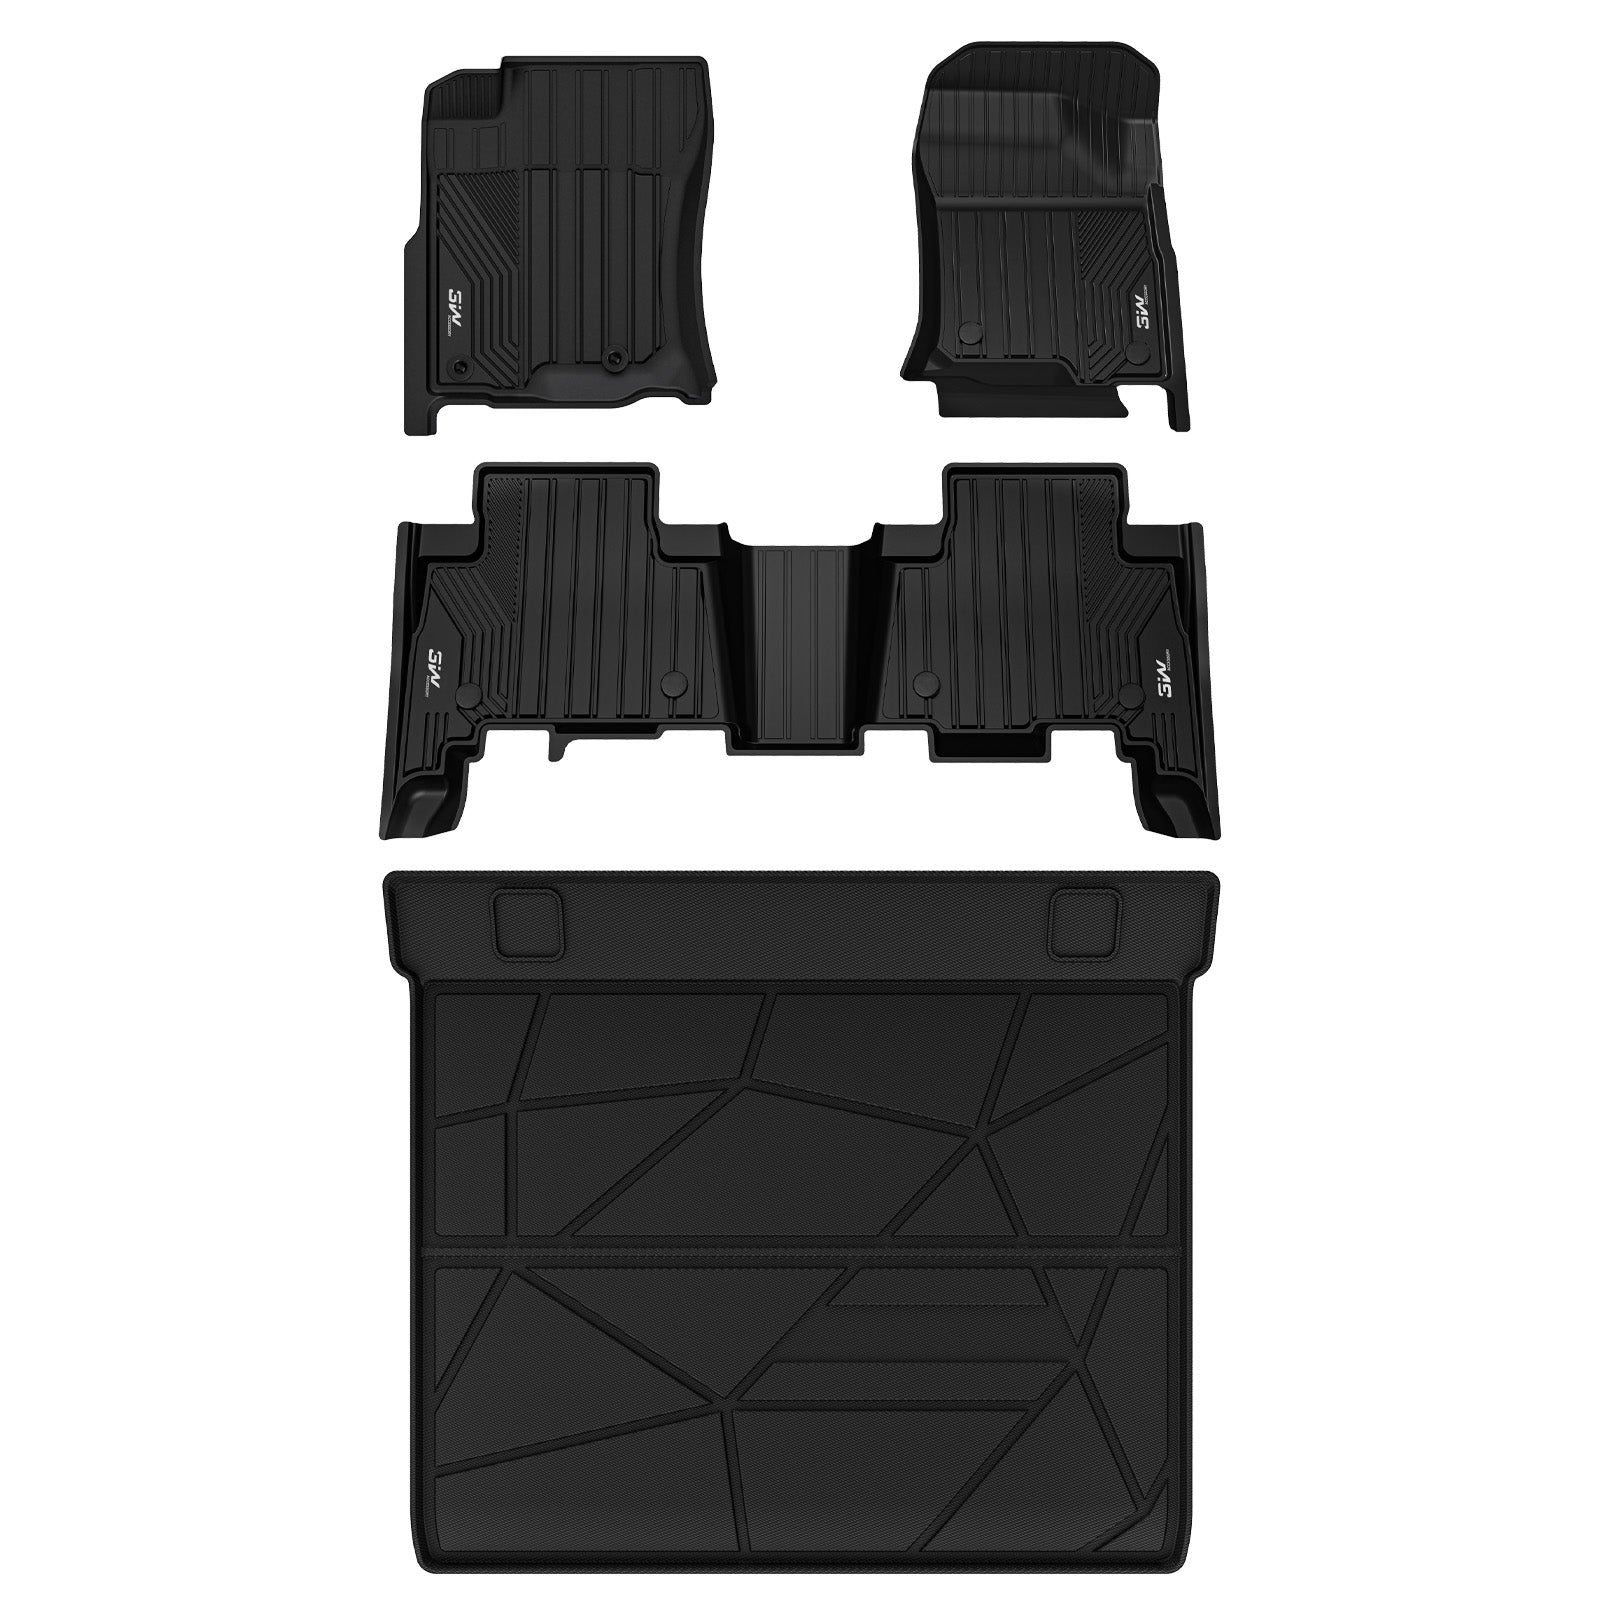 3W Lexus GX460 2014-2022 (Only for 5 Seats) Custom Floor Mats TPE Material & All-Weather Protection Vehicles & Parts 3Wliners 2014-2022 GX460 2014-2022 1st&2nd Row+Trunk Mat